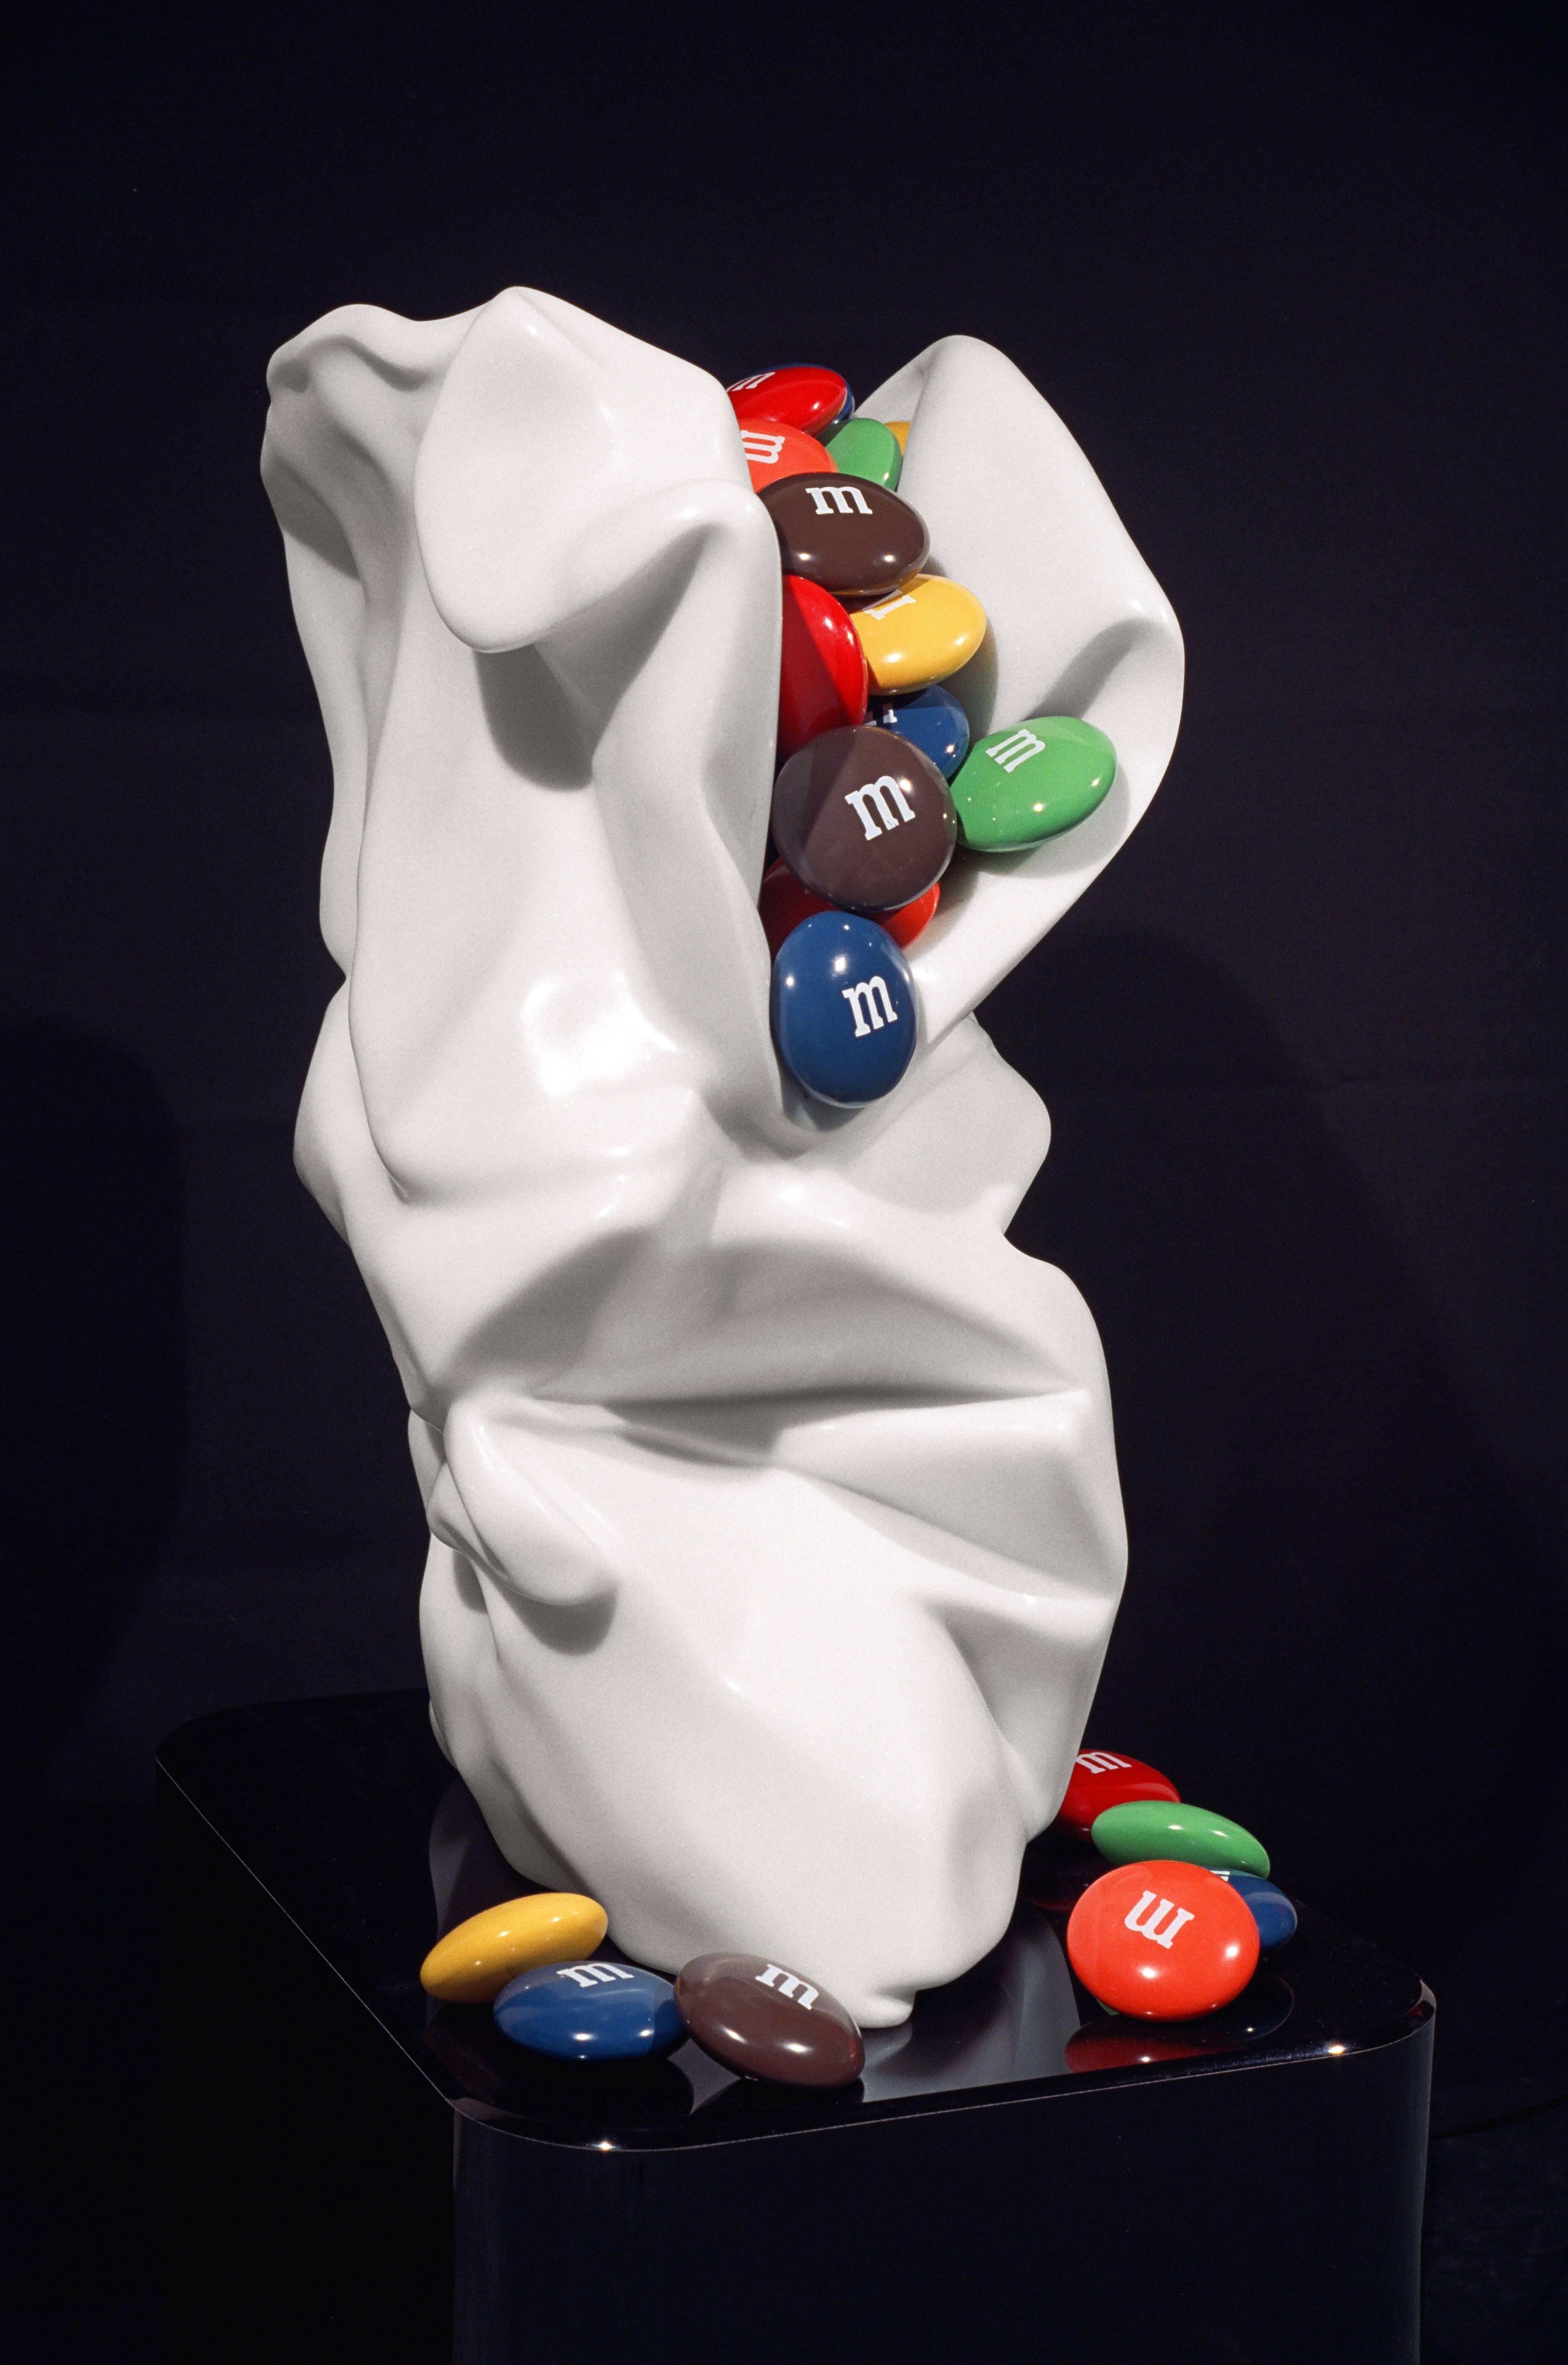 2004
bag marble, M&M’s carved out of marble and cast in resin
bag is 30” H X 15” W X 20” D
M&M’s 3” X 3”,
Base is 18” H total weight 800lbs.

Artist statement:
My passion for sculpting is expressed in my creation of the virtual records of